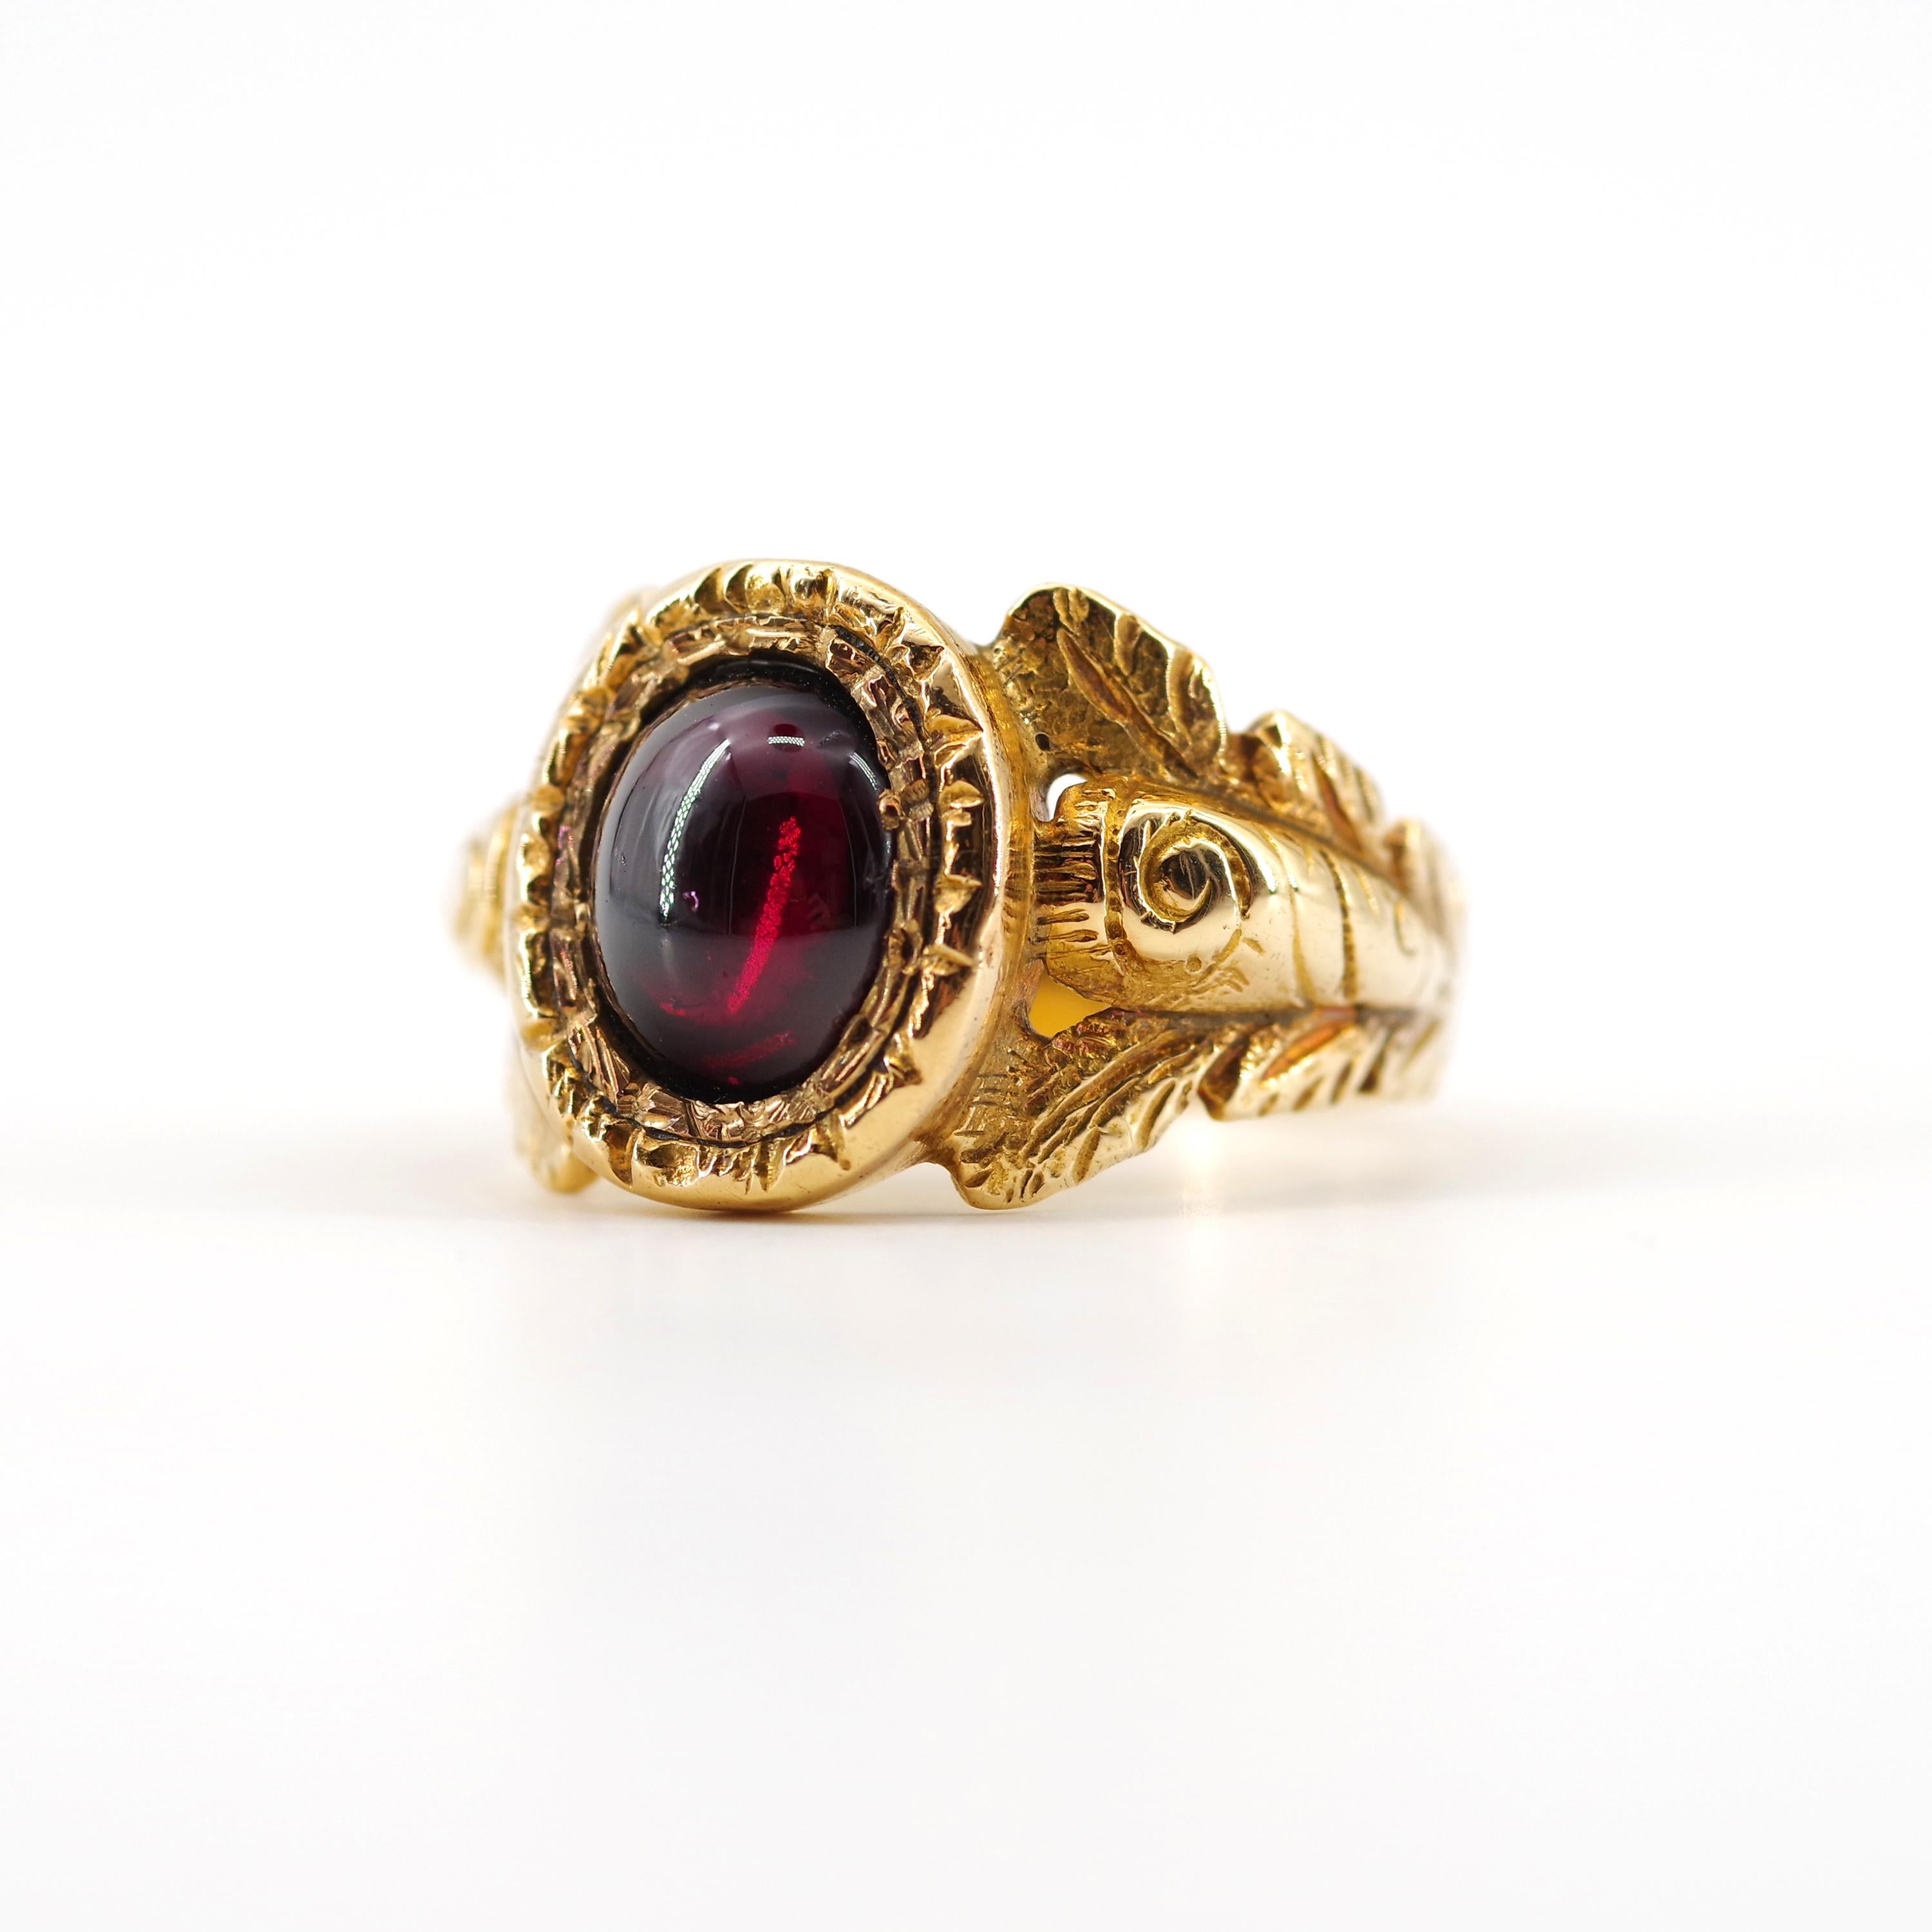 Men's Georgian Garnet Ring from France with Deeply Carved and Engraved Shoulders 2